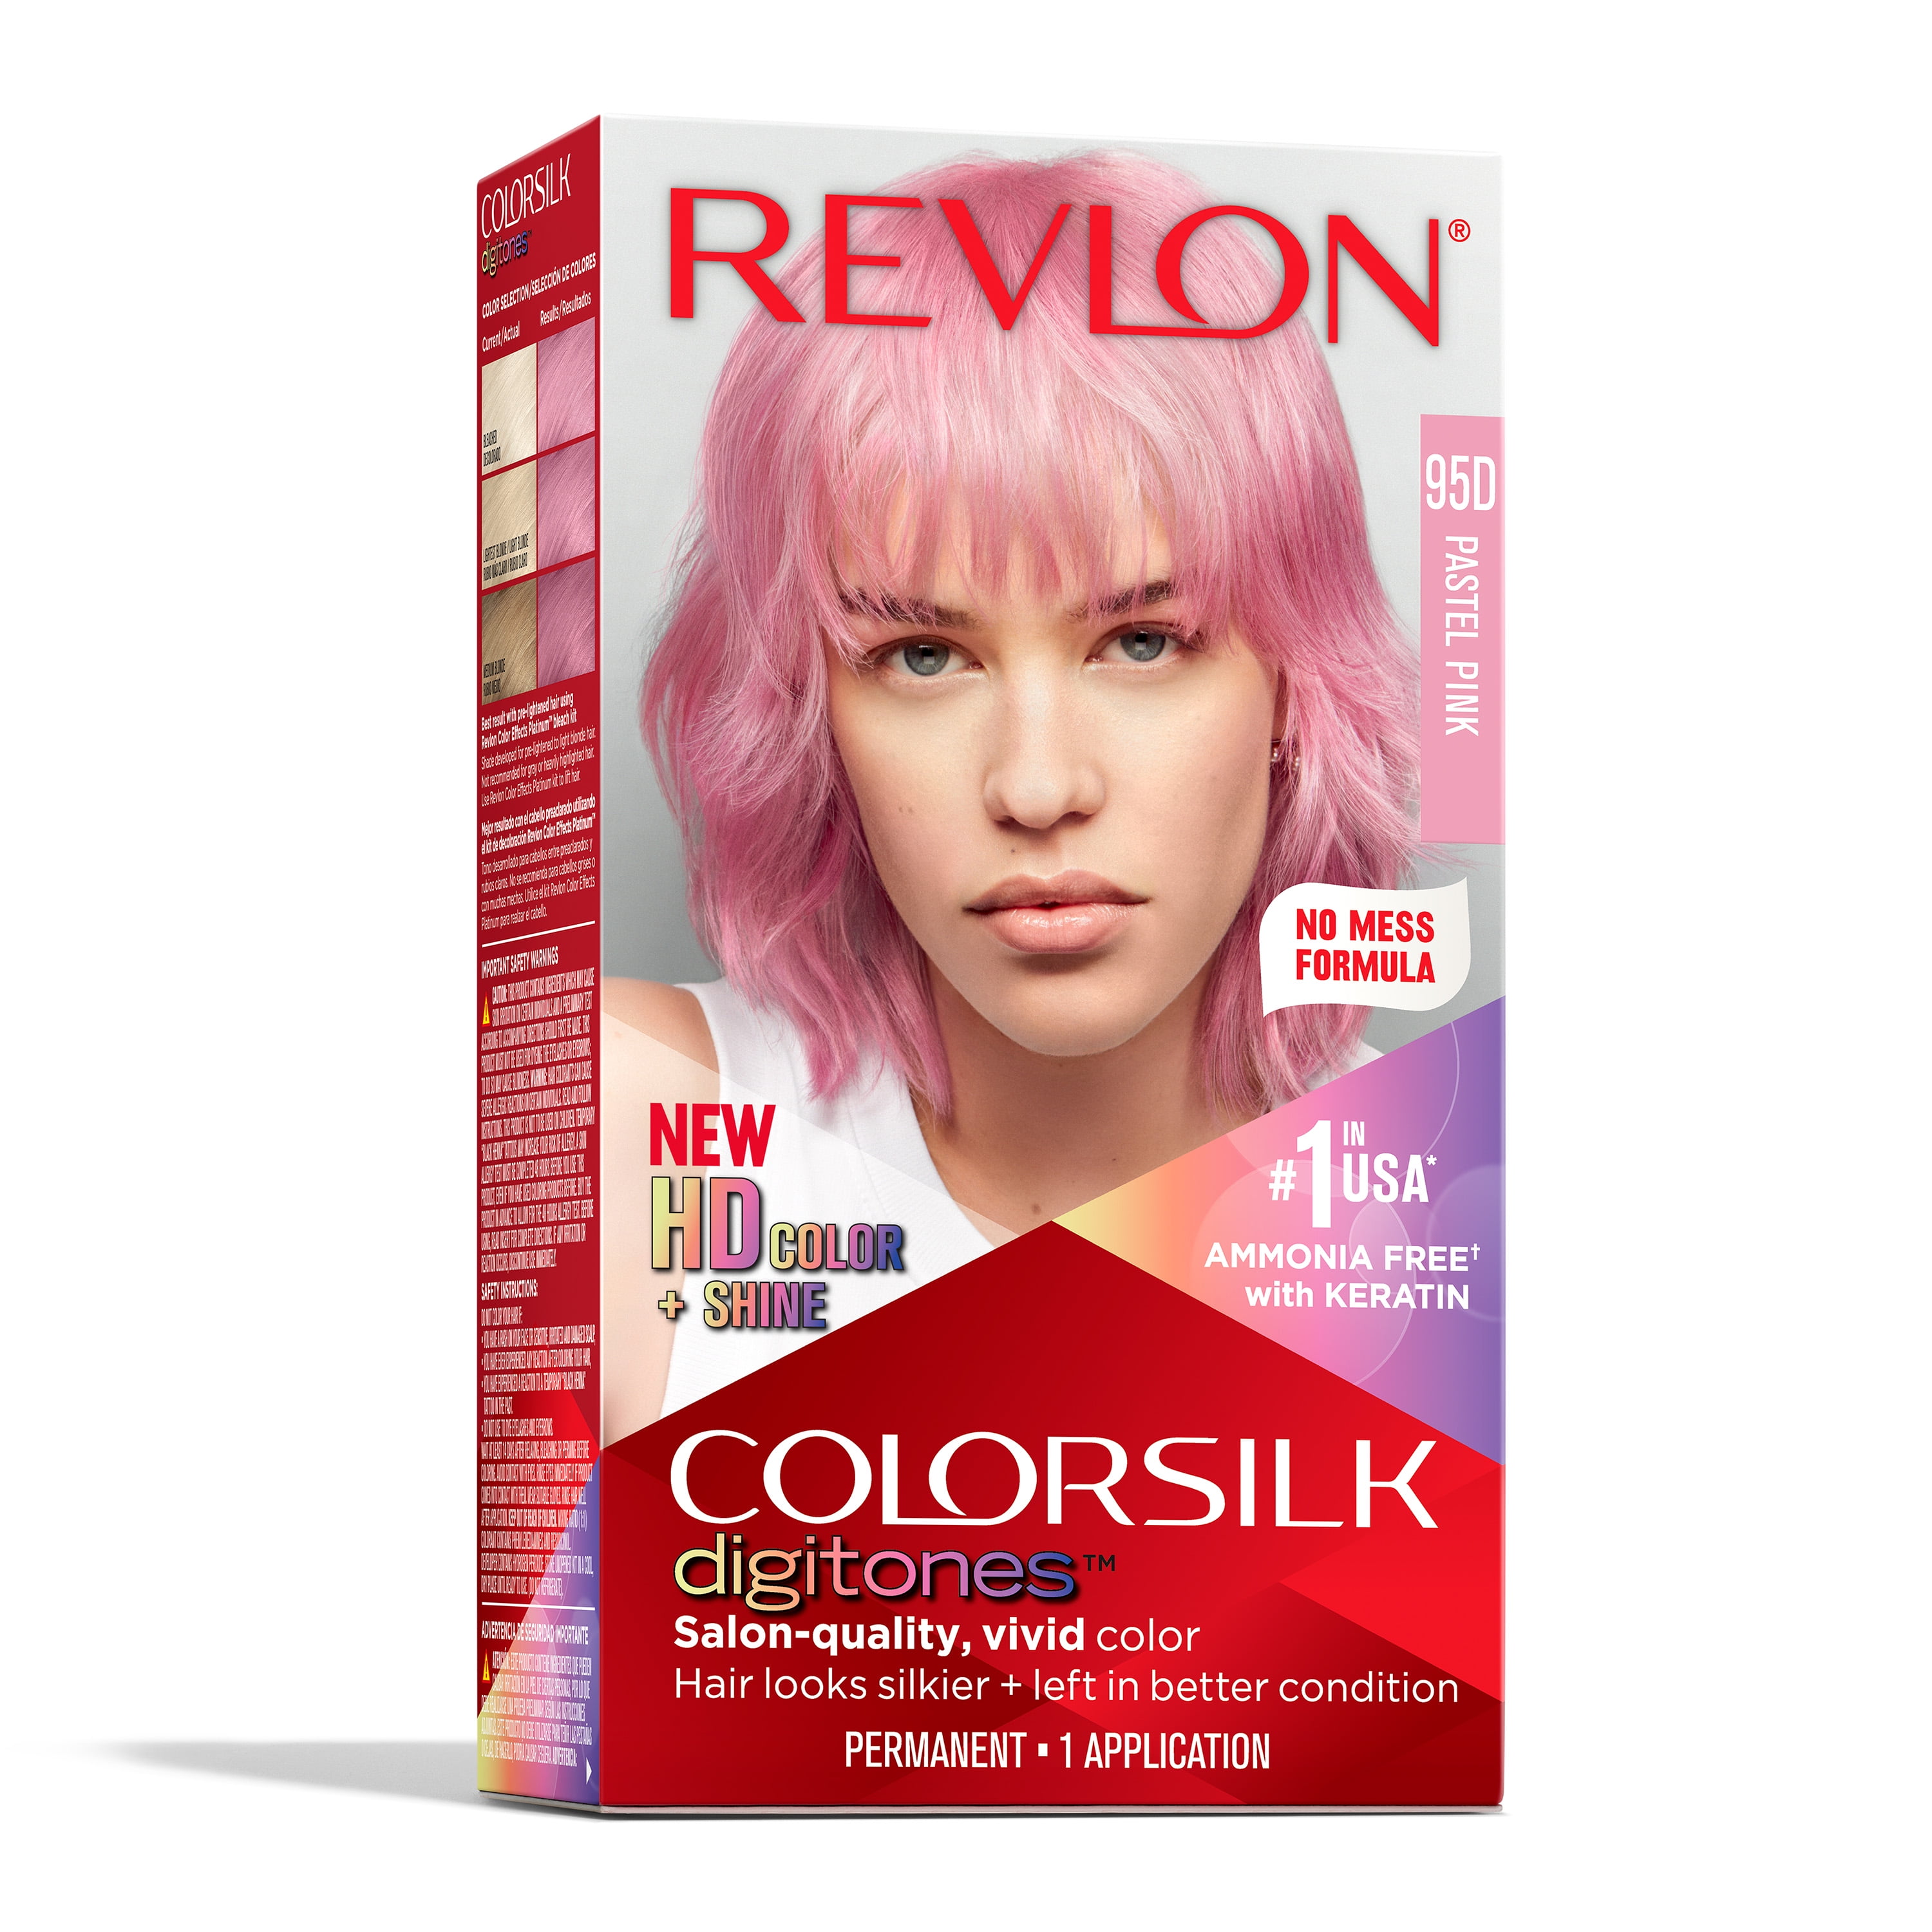 Cotton Candy Dreams: Why Light Pink Hair Dye Works on Natural Brunettes |  All Things Hair US